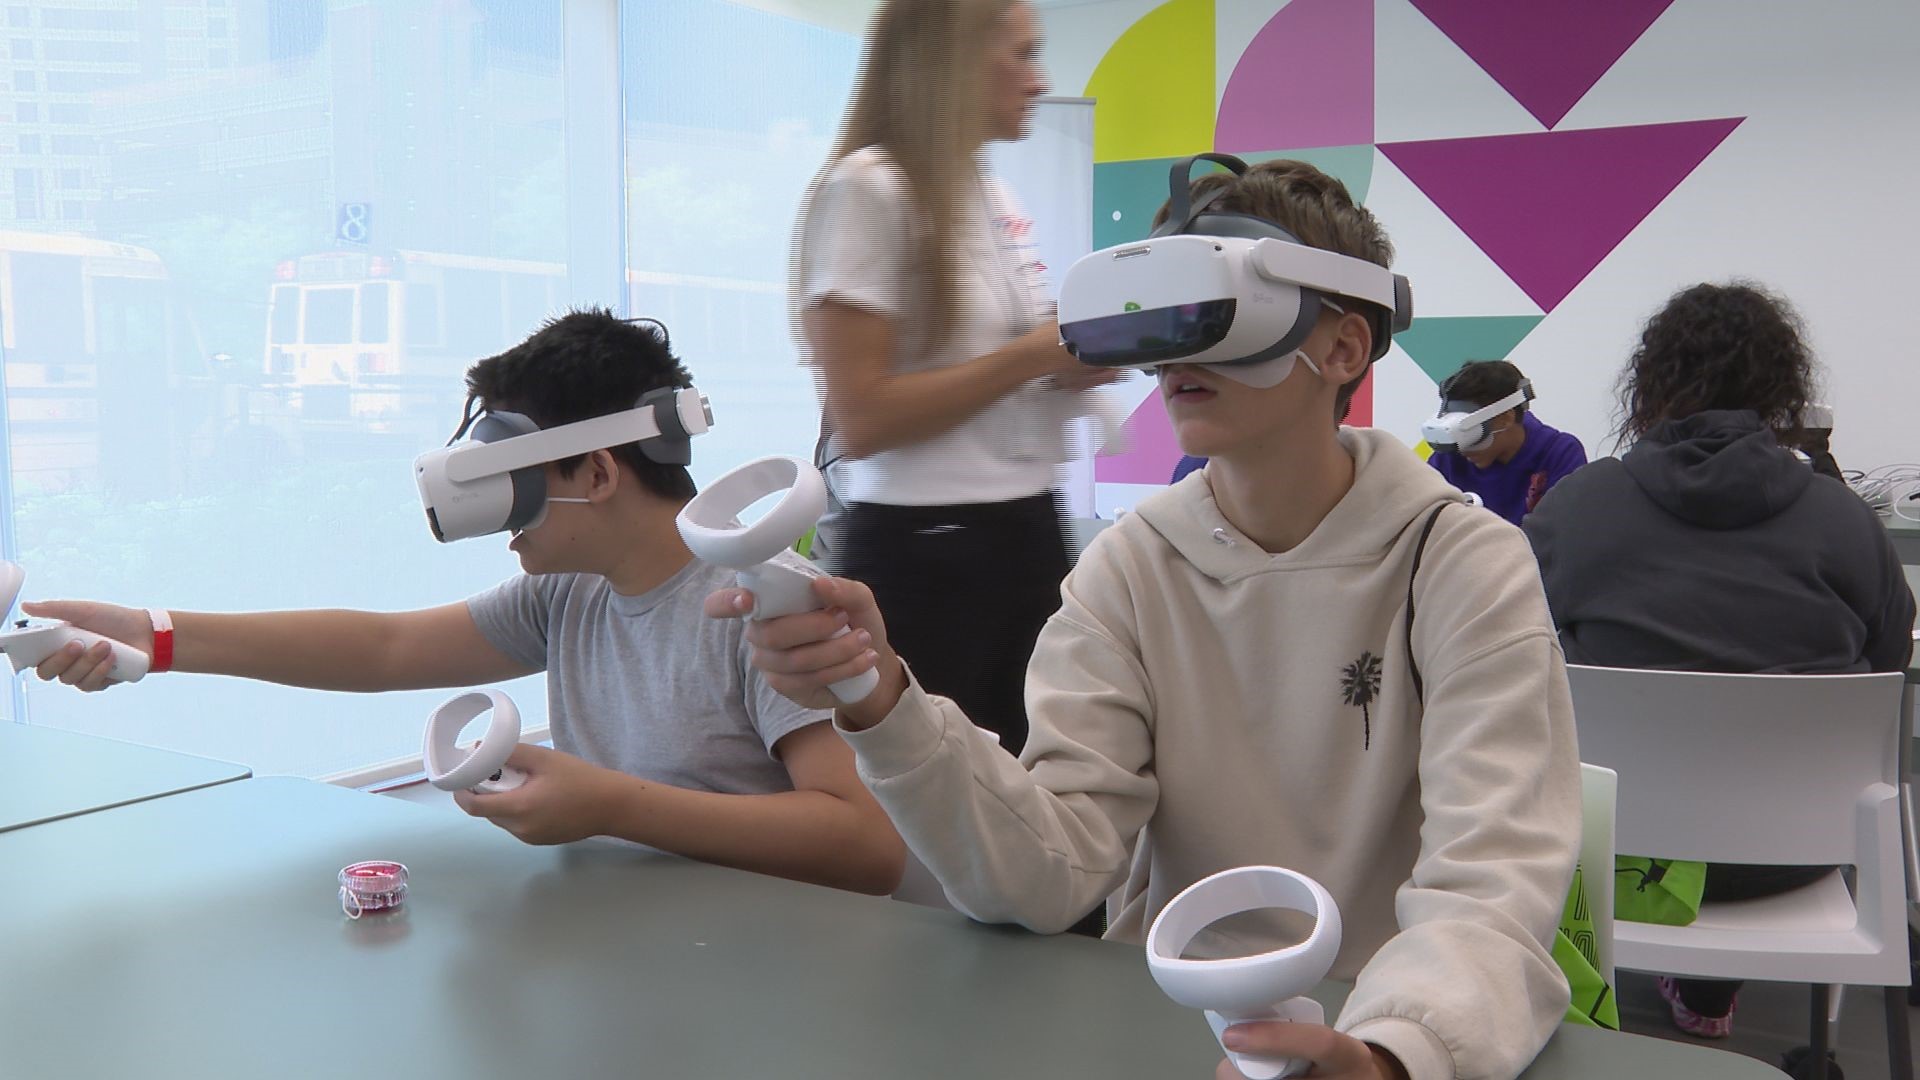 Middle school students from across the Grand Rapids area got the chance to experience VR, and learn about careers in West Michigan's tech industry.